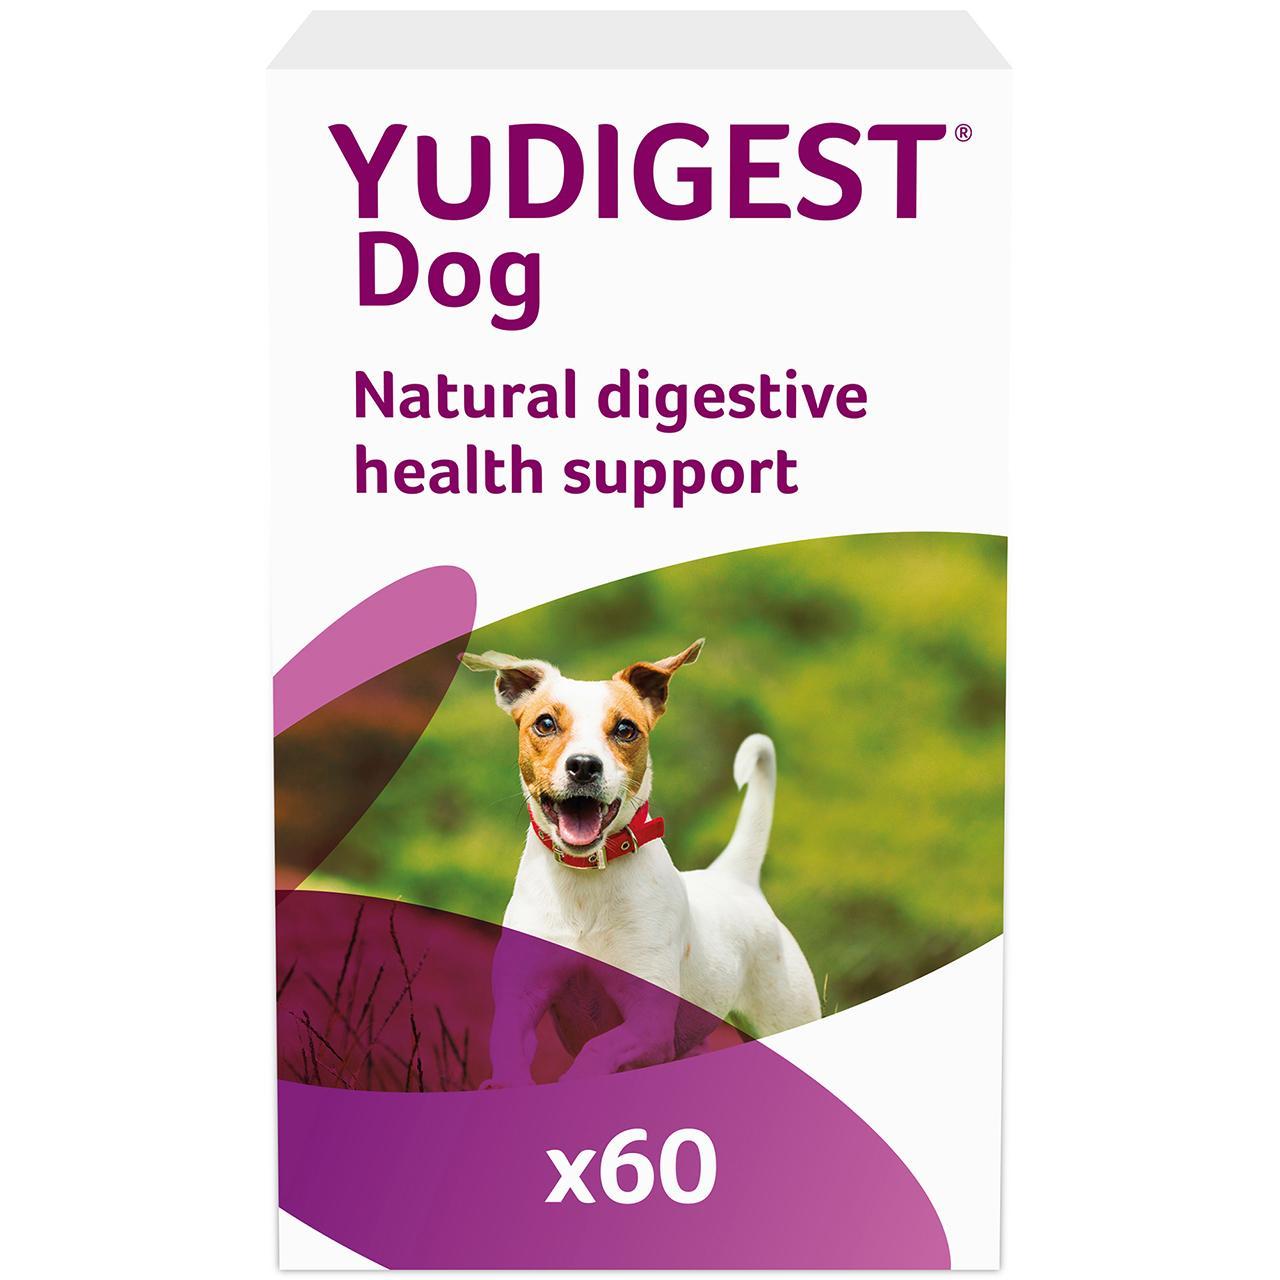 An image of YuDIGEST Dog Probiotic Digestive Health Support